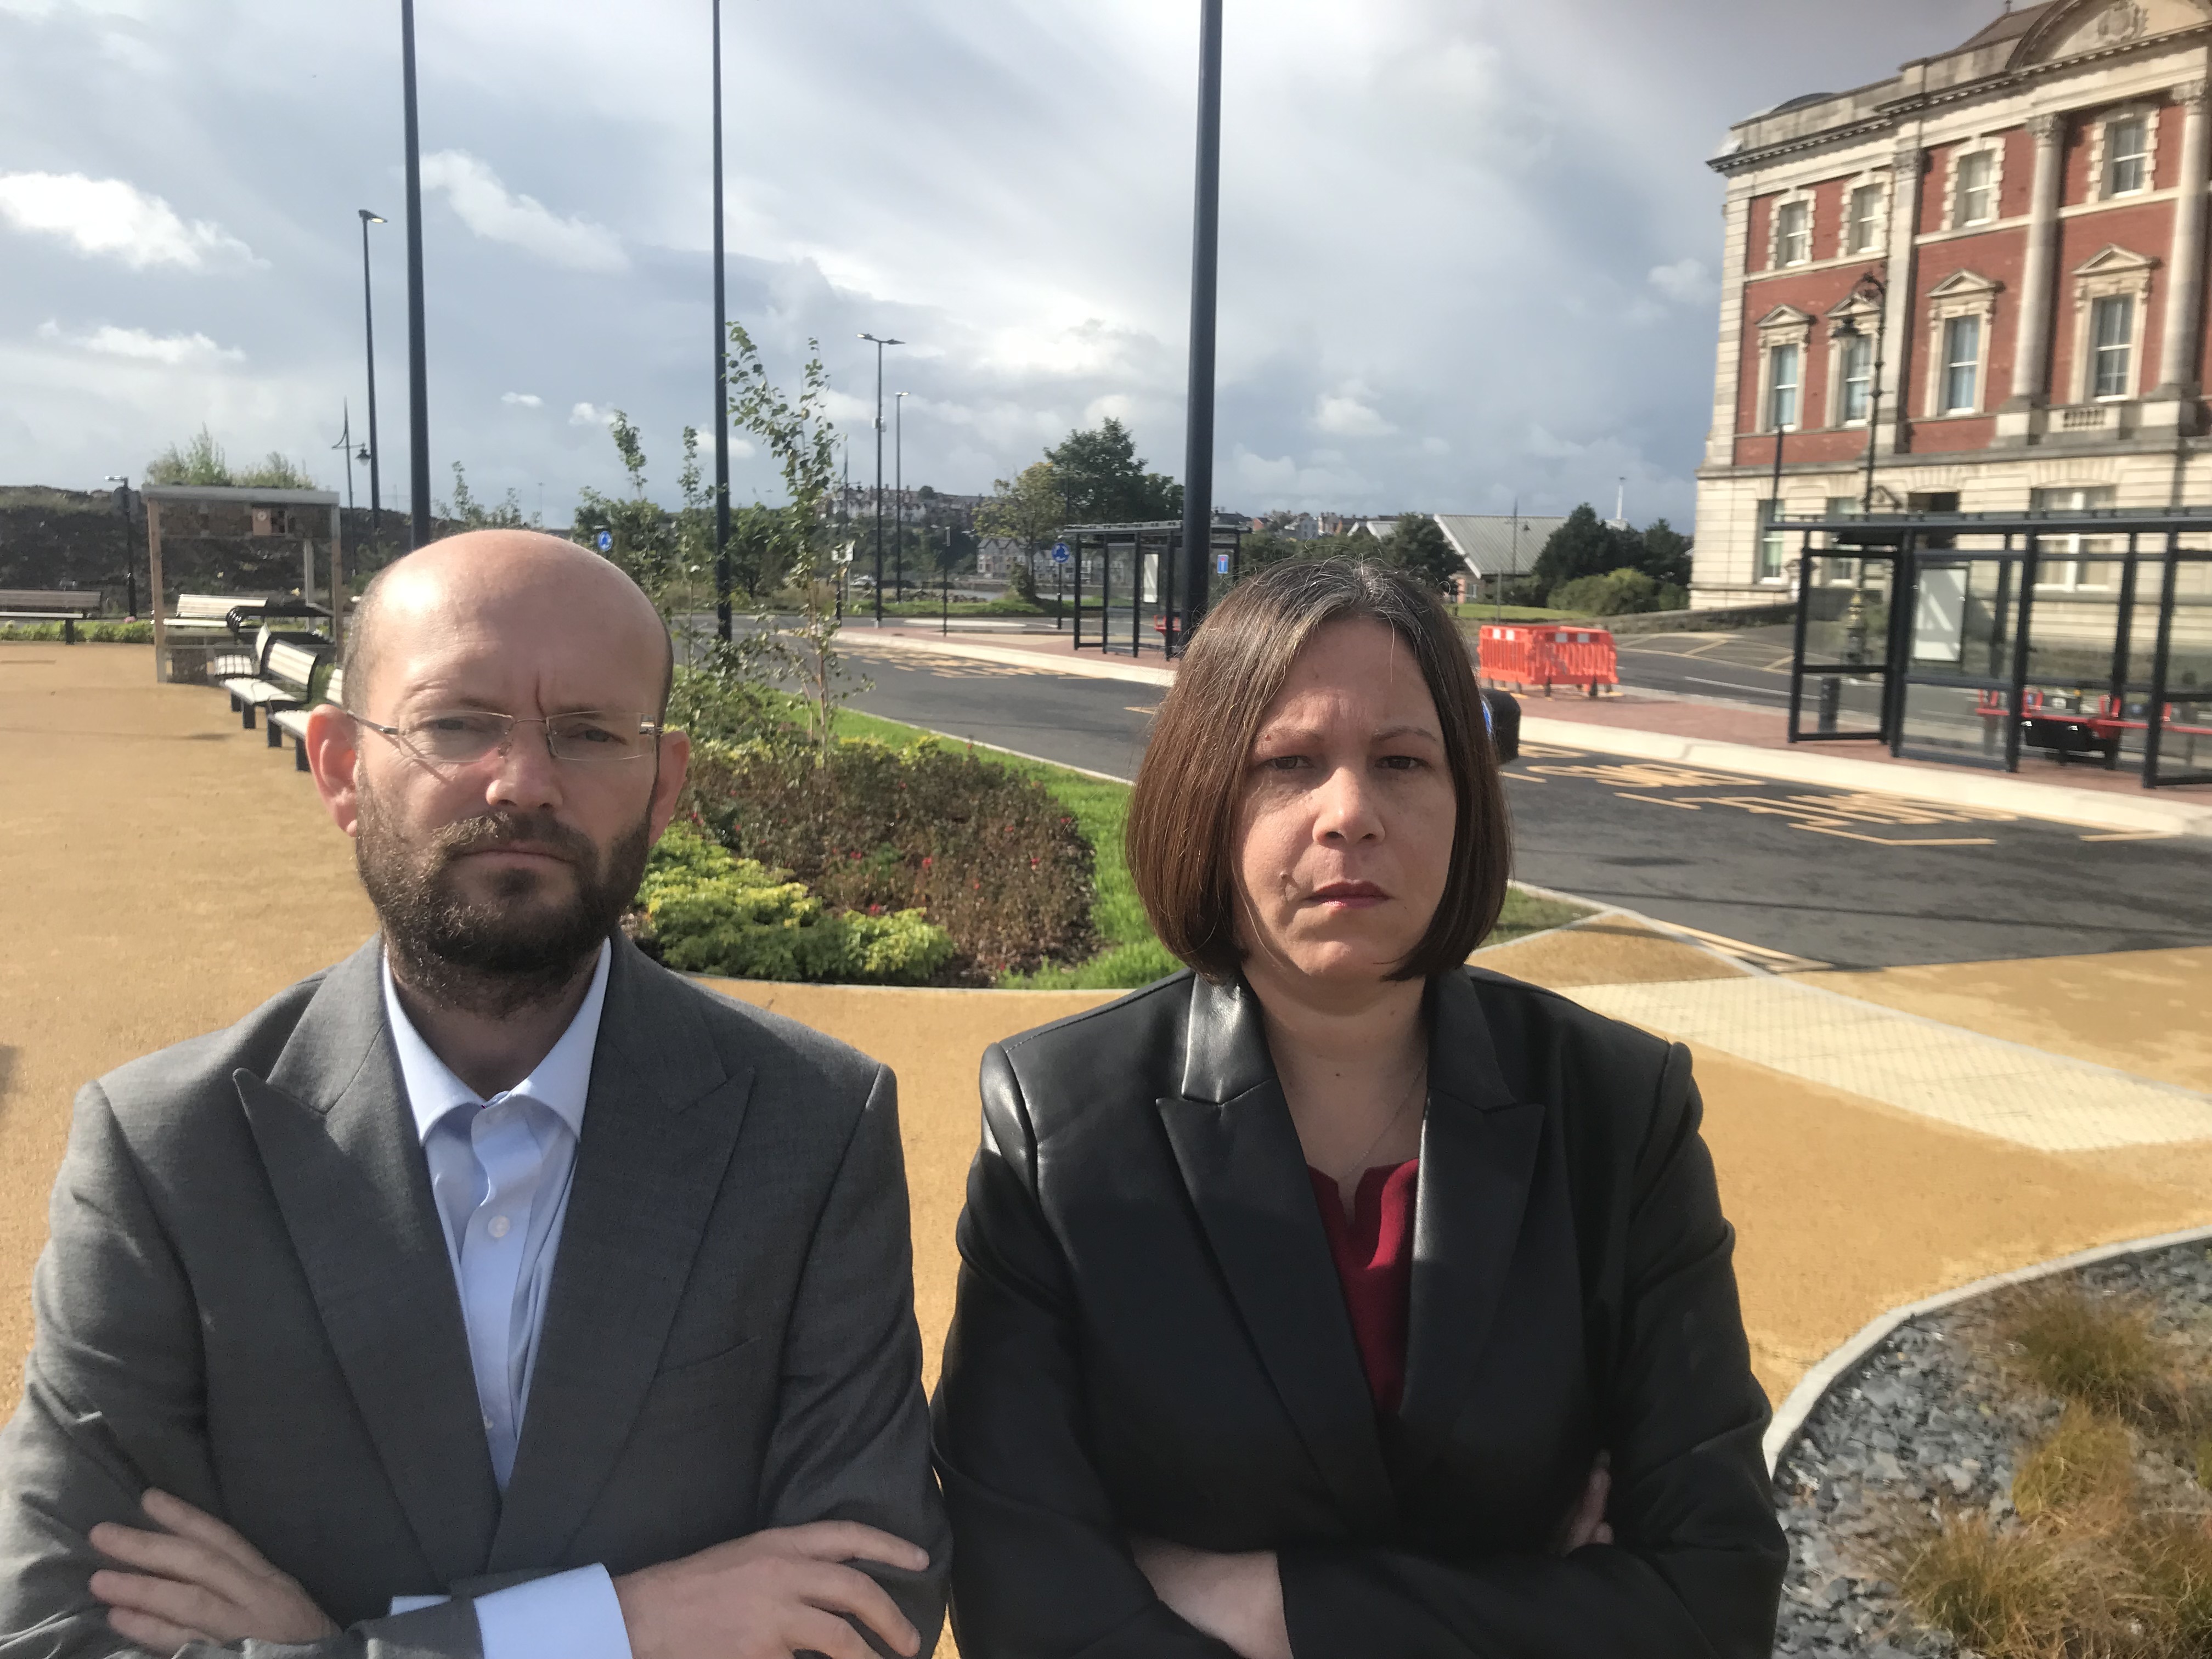 Cllr Ian Johnson and Cllr Millie Collins at the Barry Docks Bus Station which has four bus shelters, but no buses.